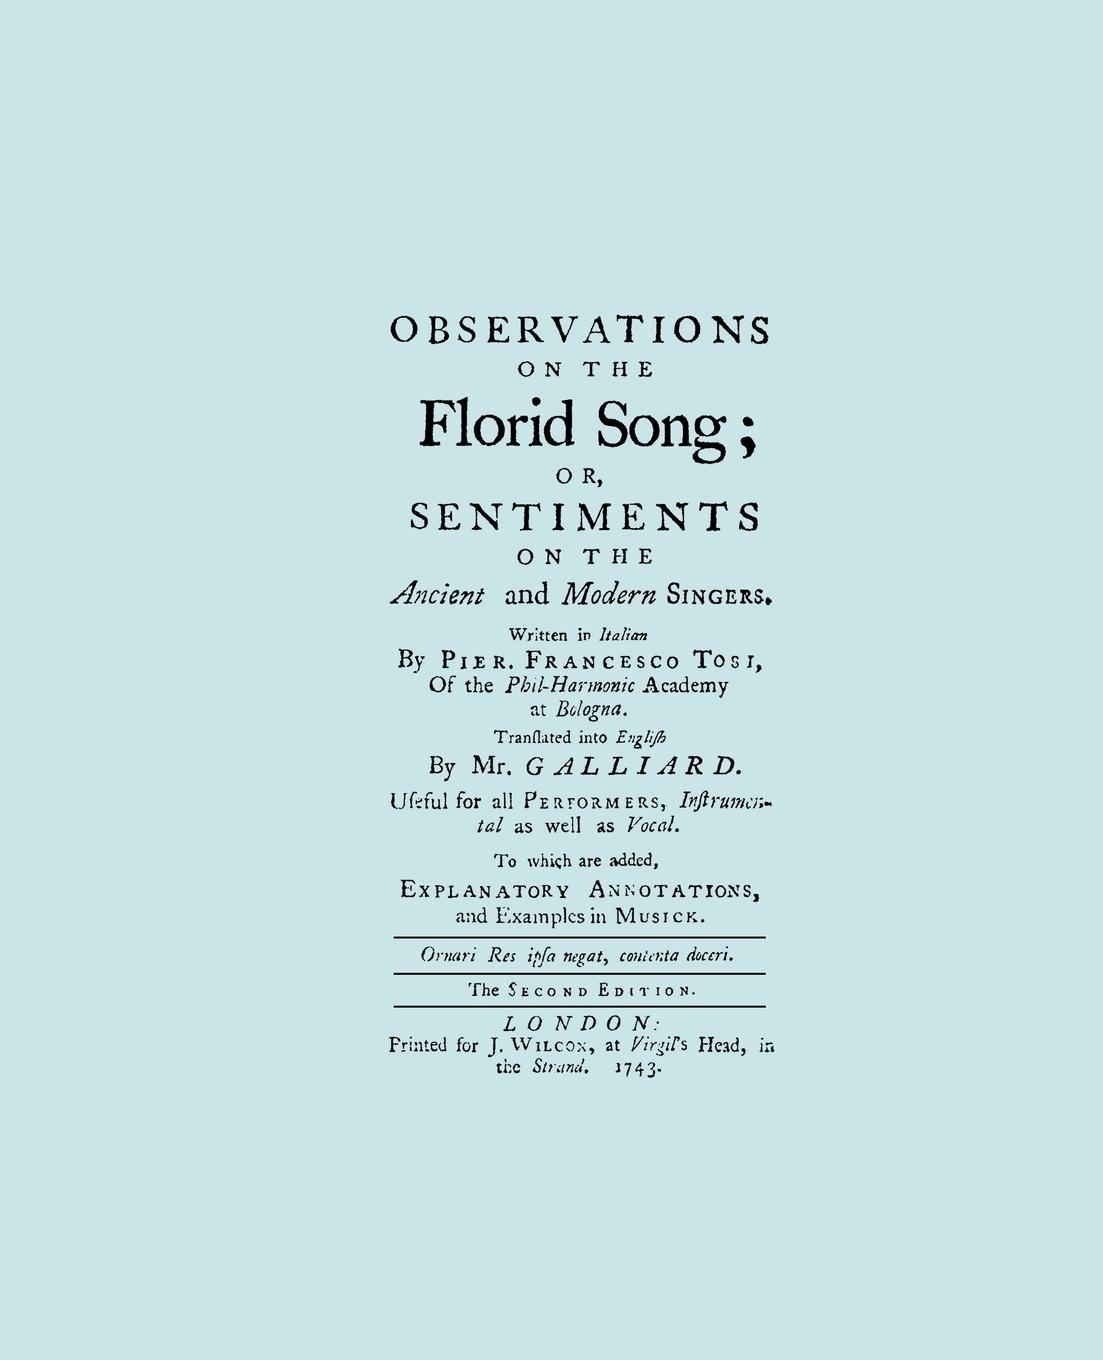 Observations on the Florid Song. (Facsimile of 1743 English Edition. Printing Two Up). - Tosi, Pier Francesco